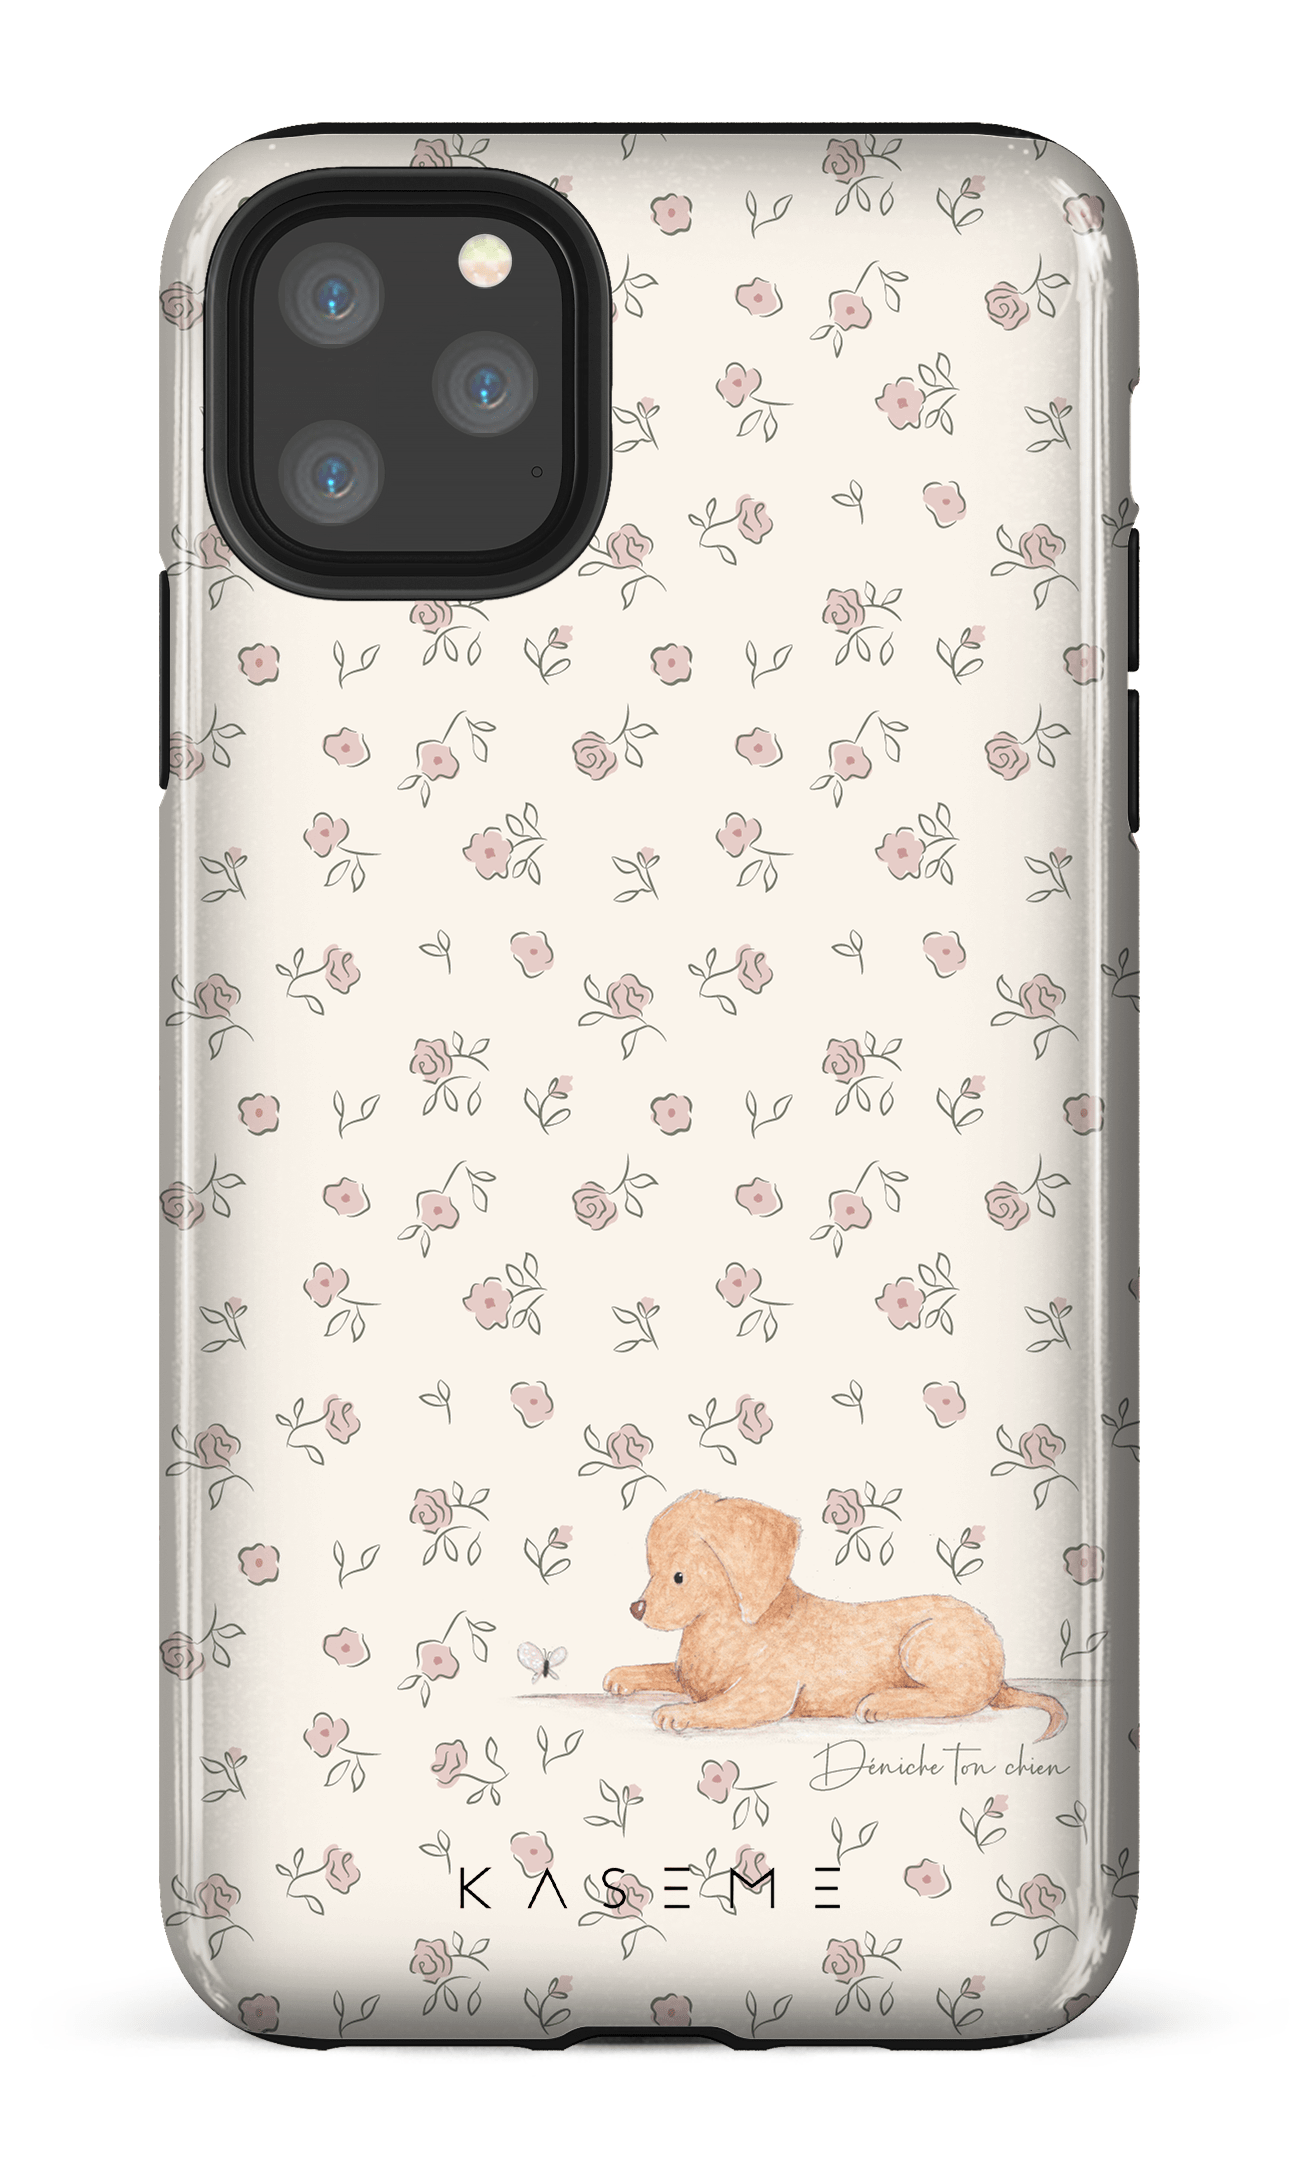 Fur-Ever A Dog Lover Pink by Déniche Ton Chien - iPhone 11 Pro Max